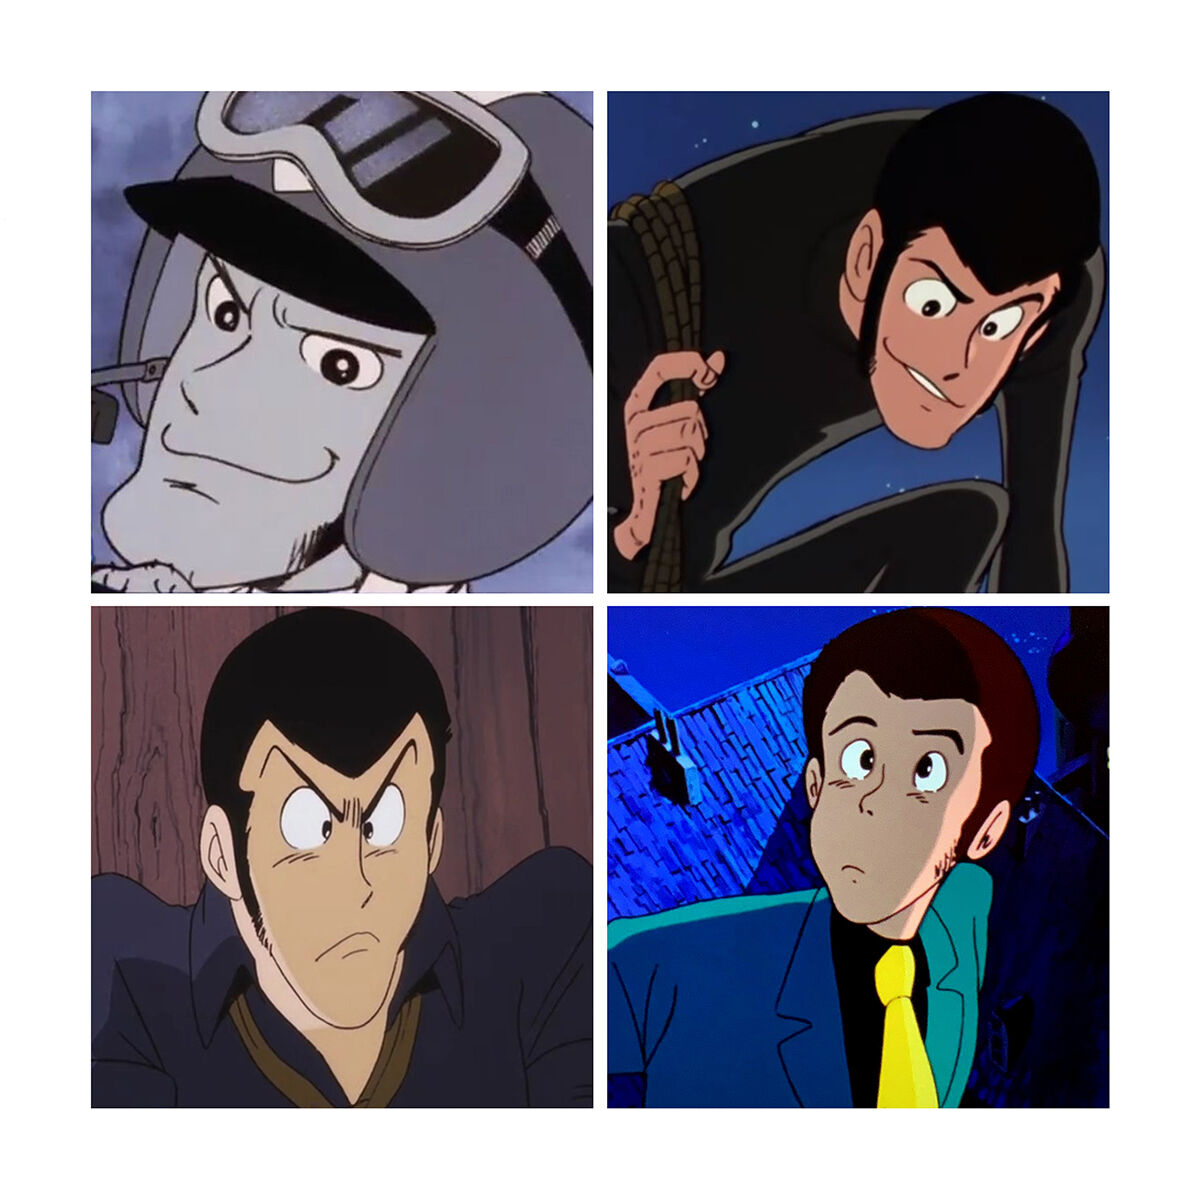 Lupin III in the 70's  The 1st TV Series (1971~72) The 2nd TV Series (1977~80) The Mystery of Mamo (1978) The Castle of Cagliostro (1979)  Which Lupin do you like?